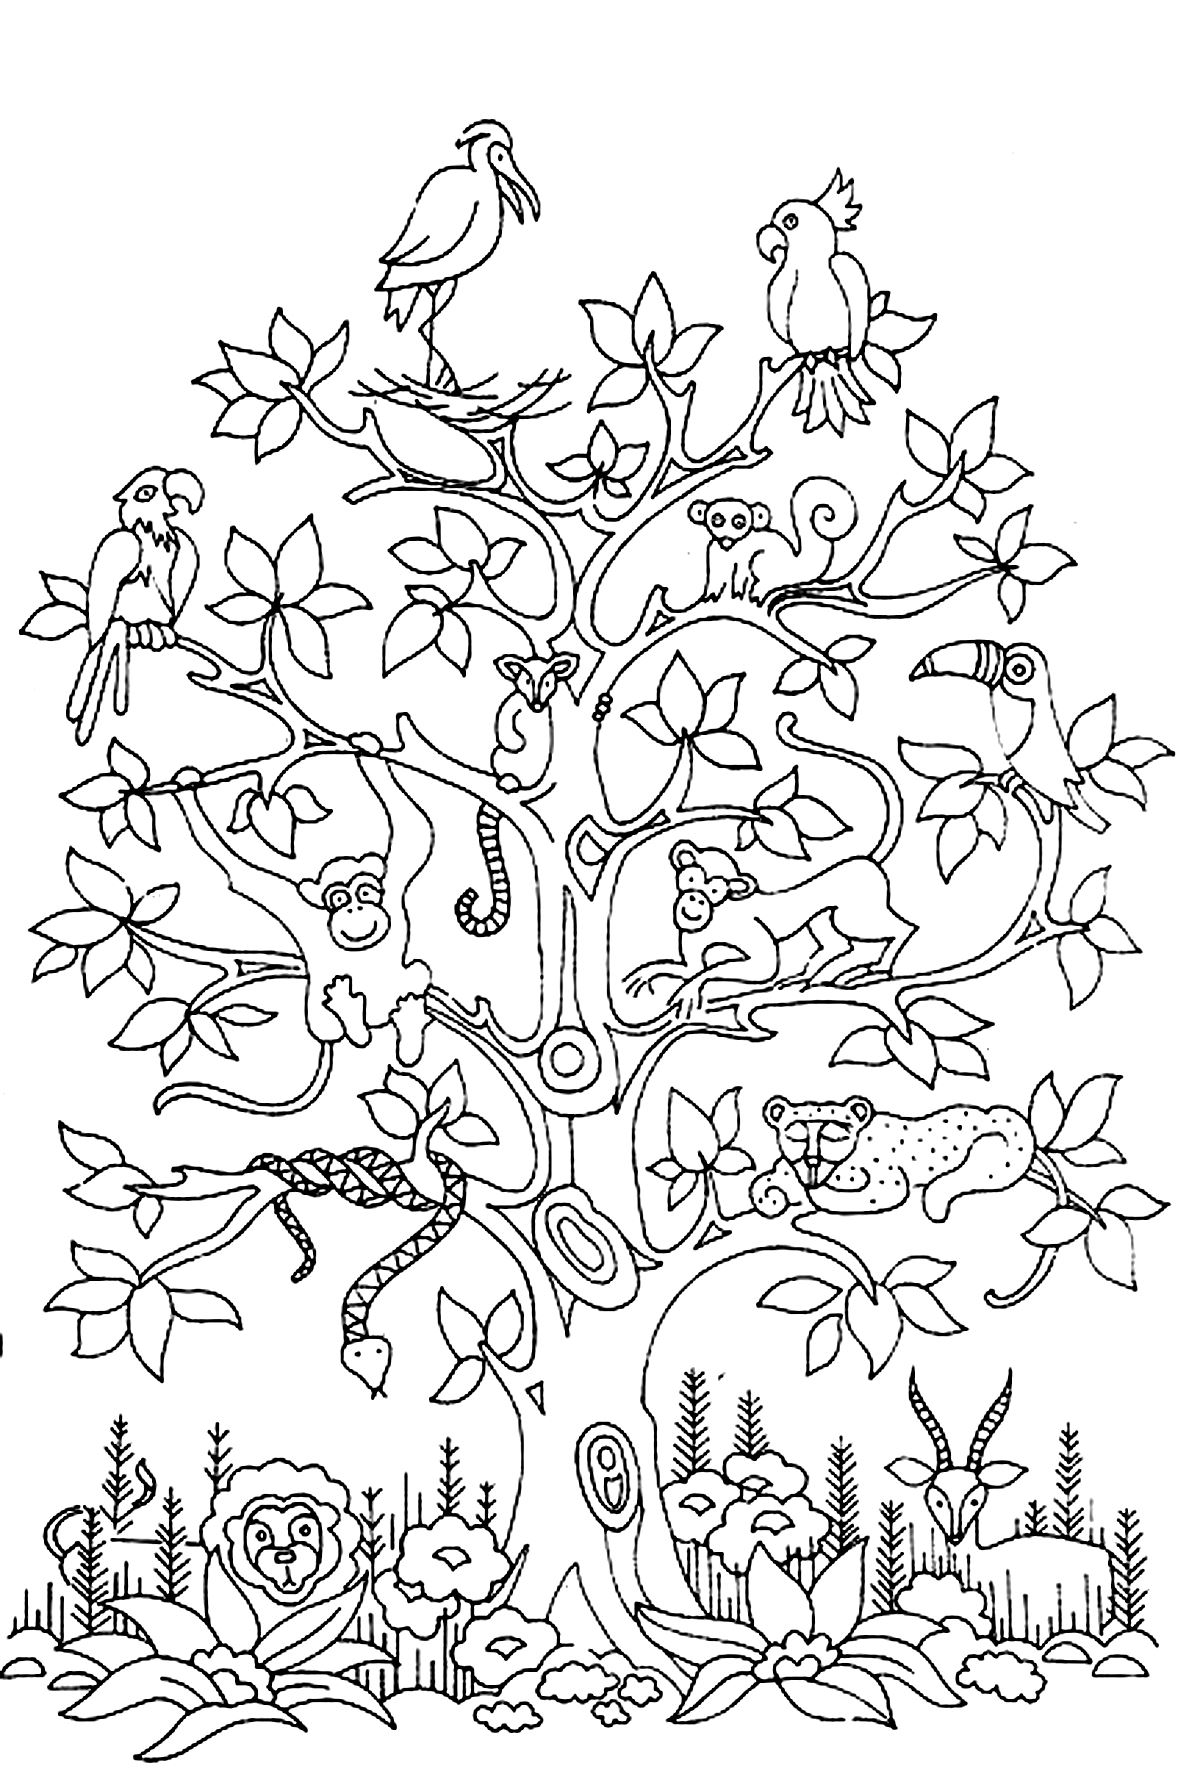 Monkeys, snake and other animals on a tree ...